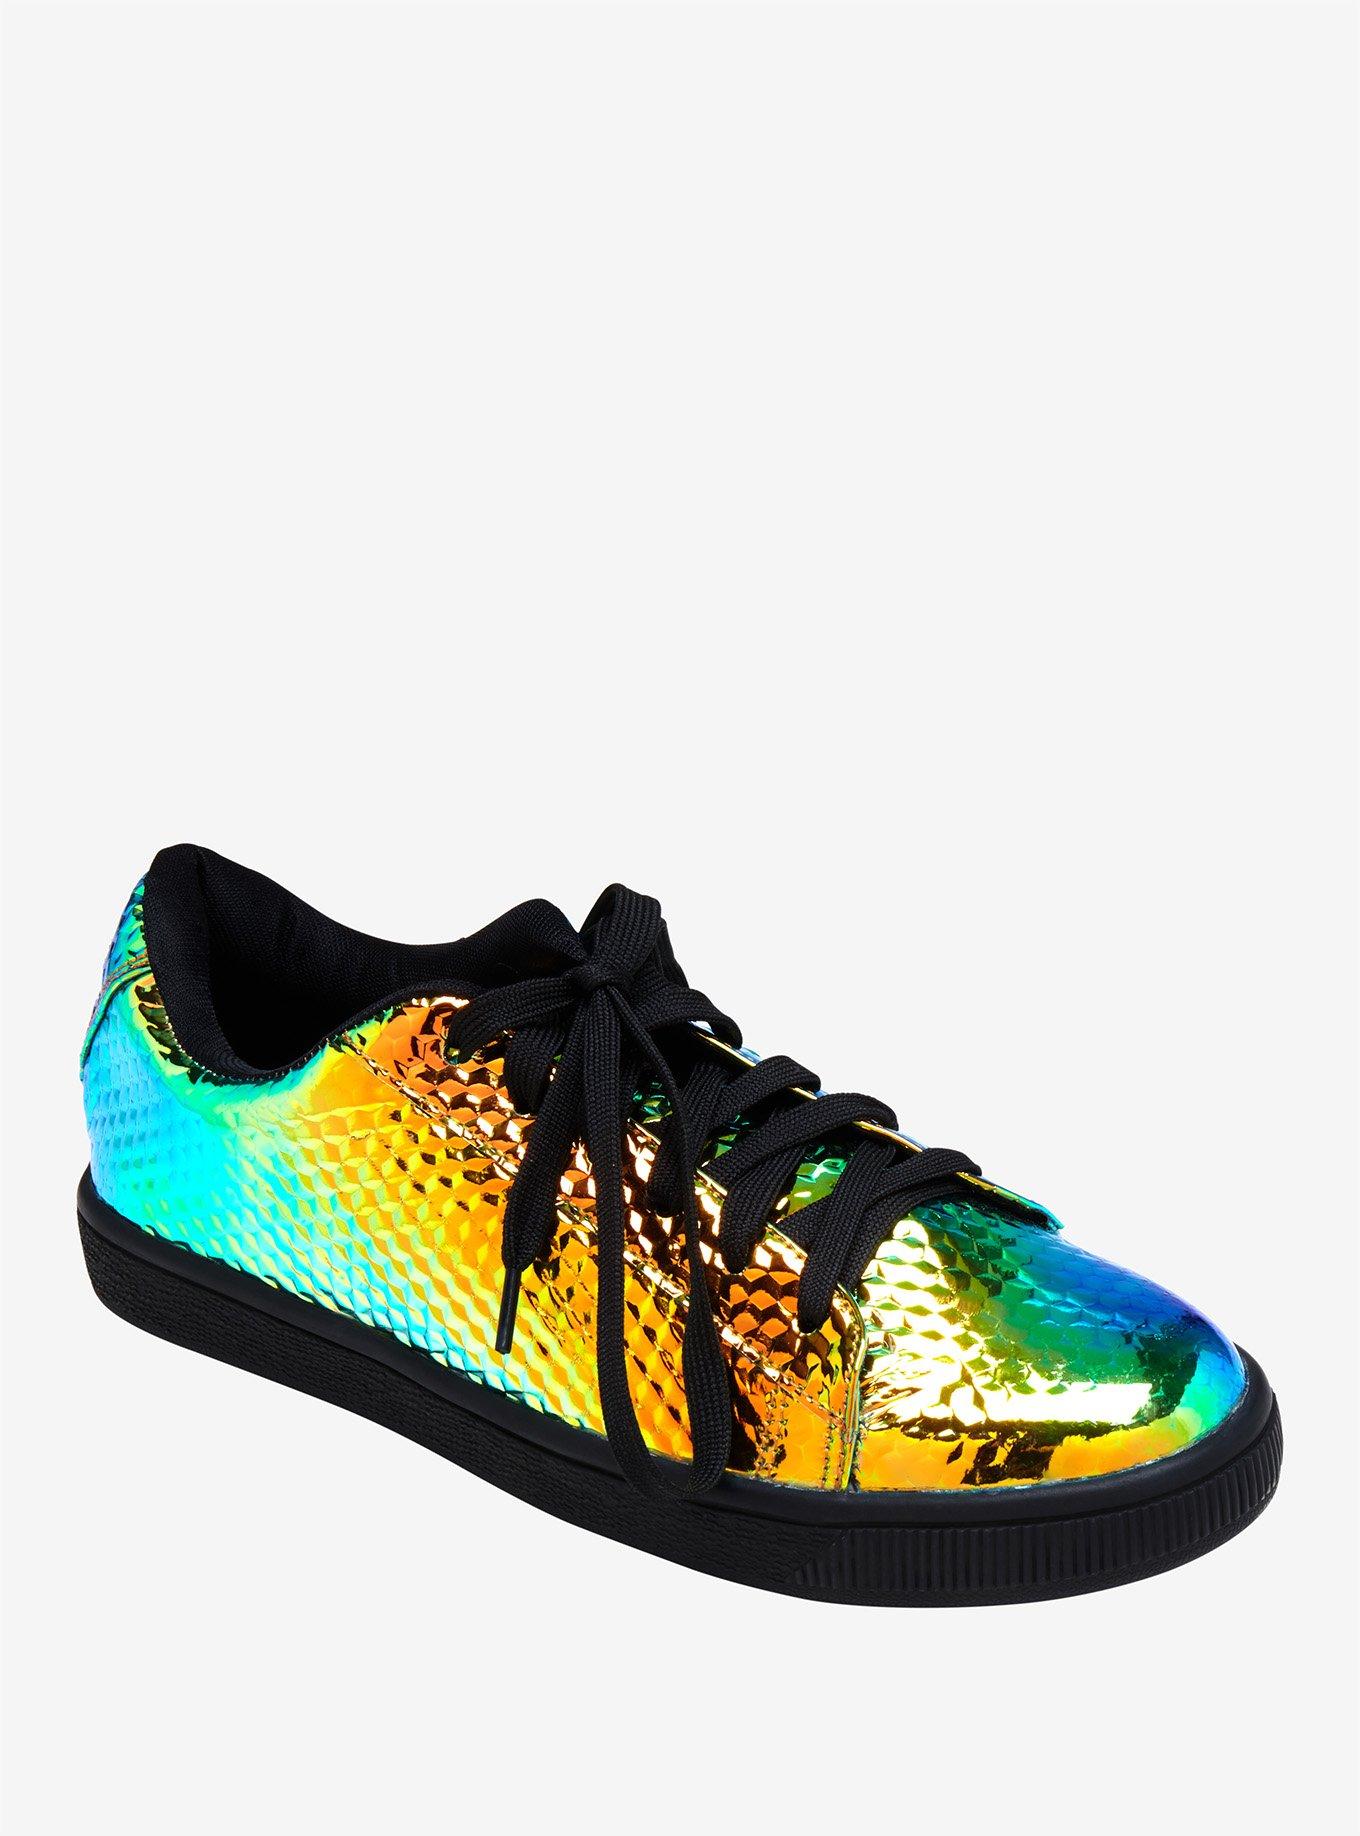 Oil Slick Textured Lace-Up Sneakers, MULTI, hi-res